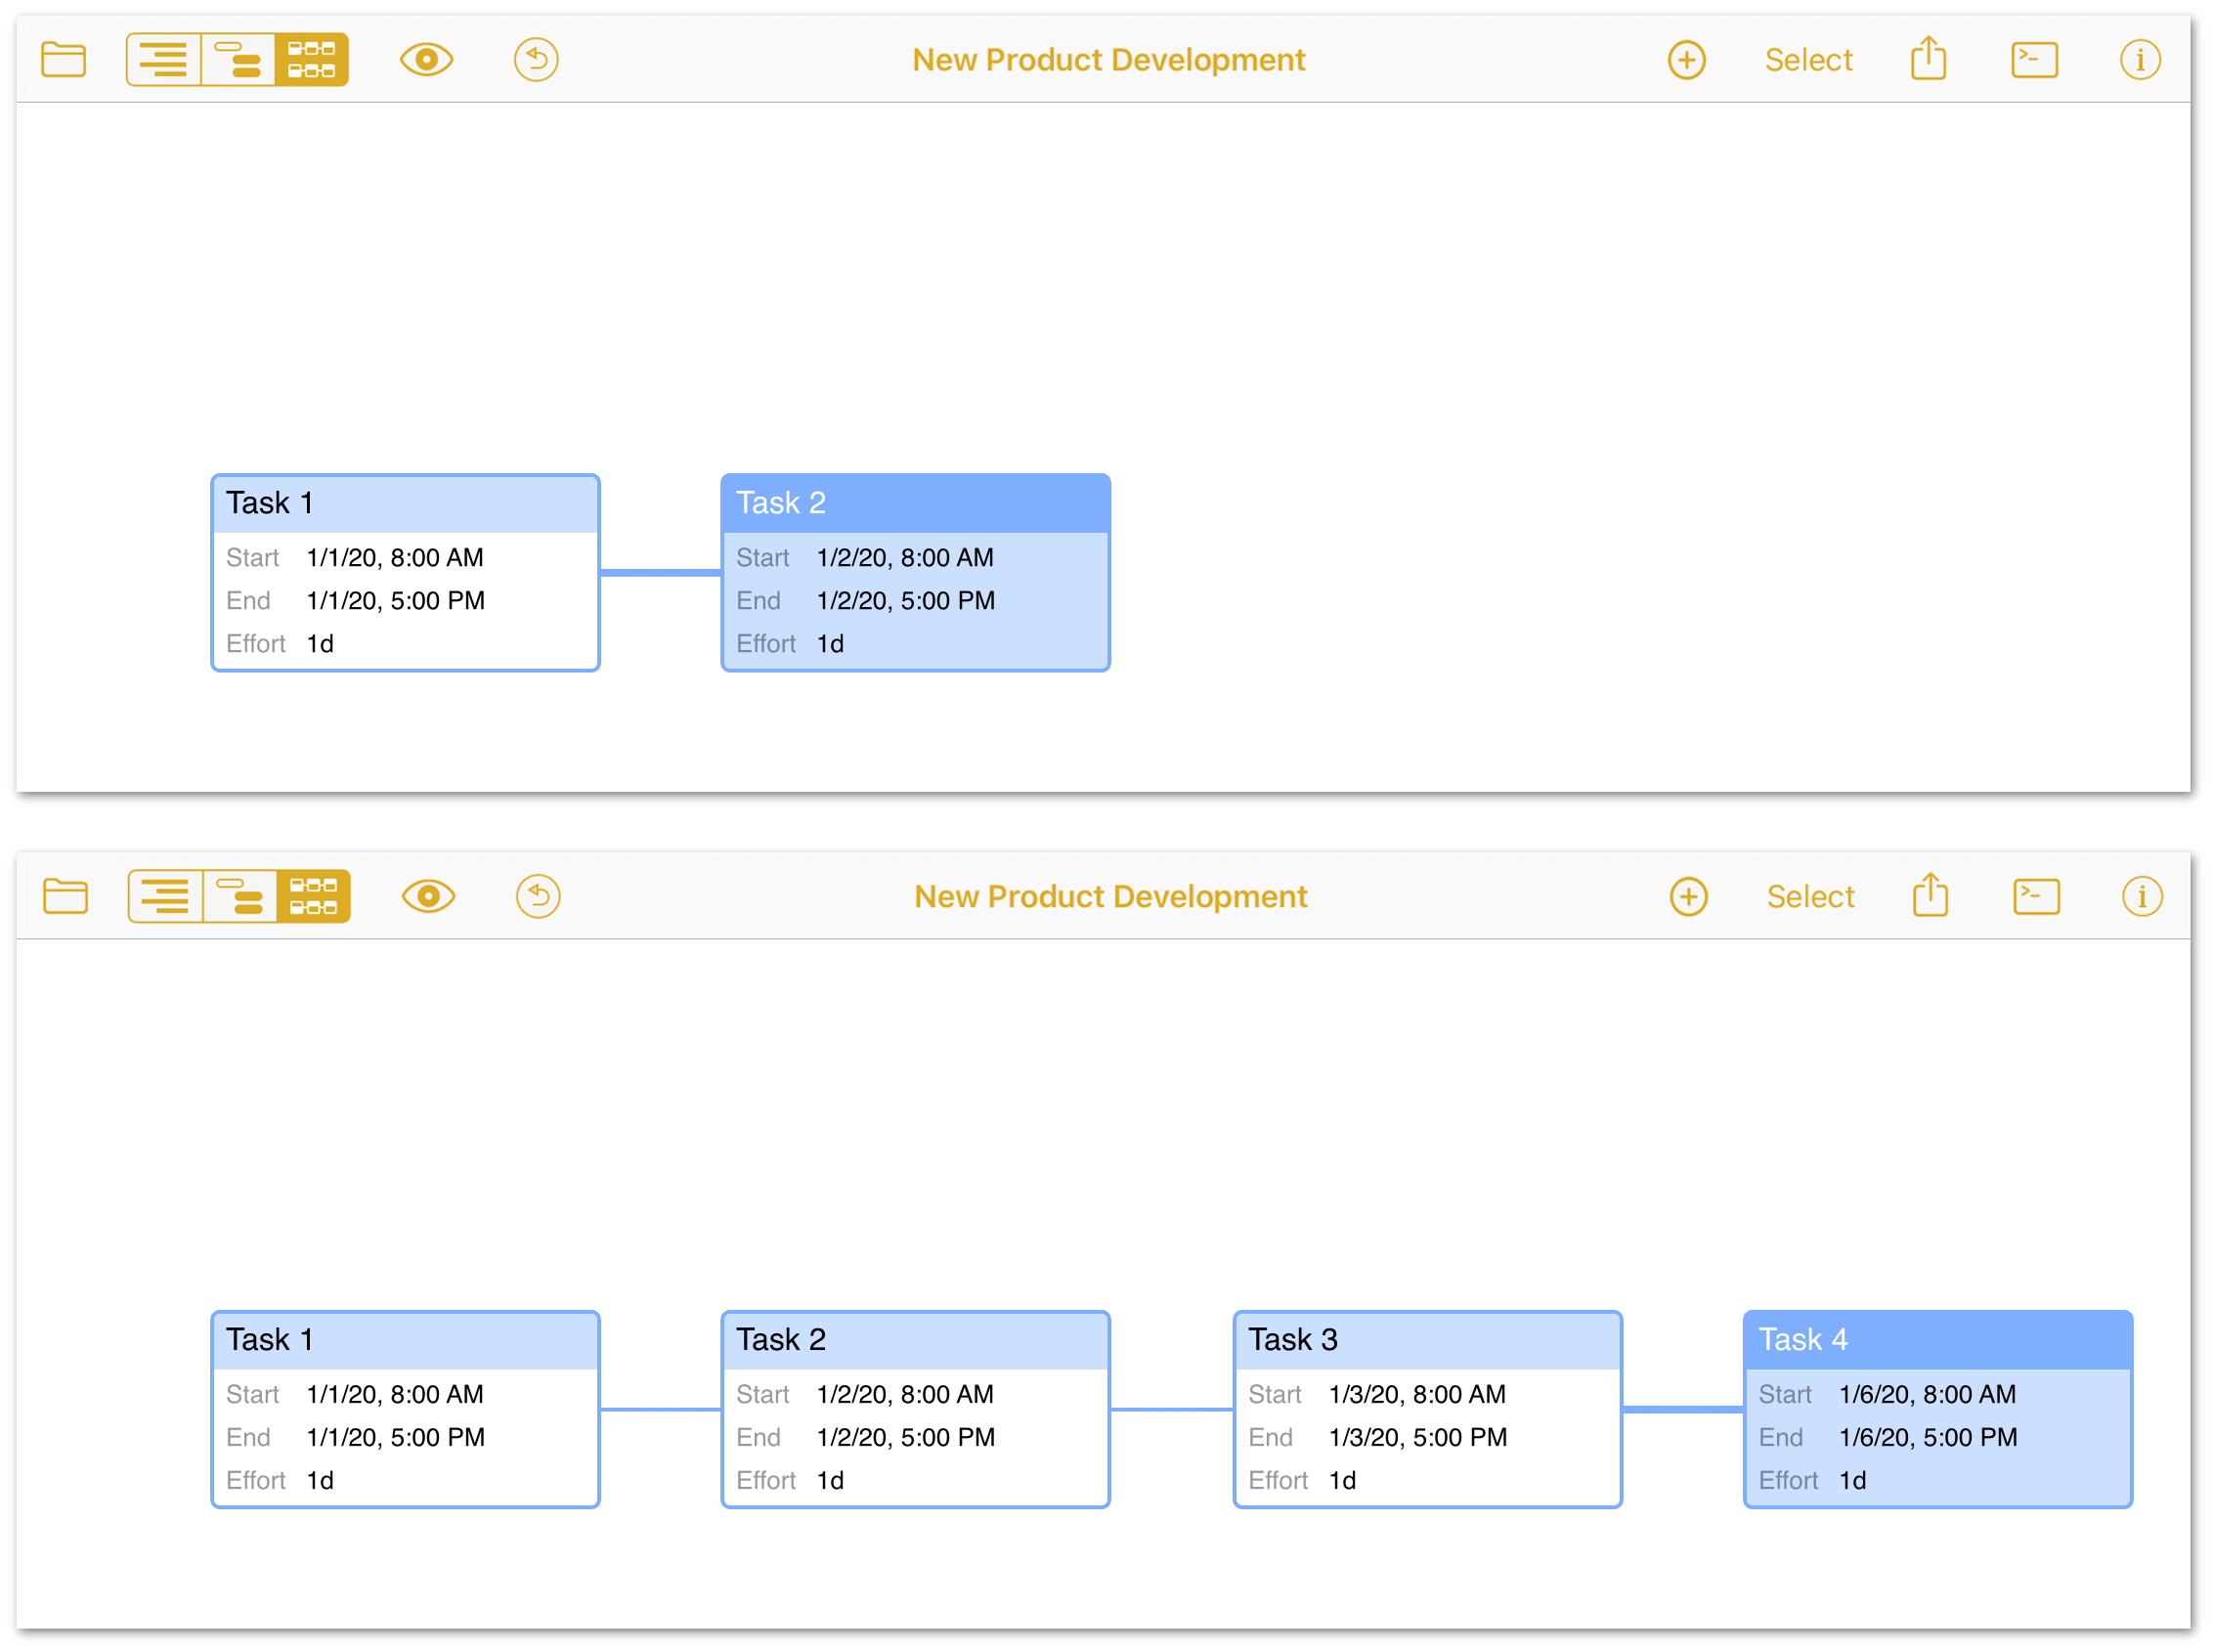 A chain of tasks in Network View, all with finish-start dependencies.